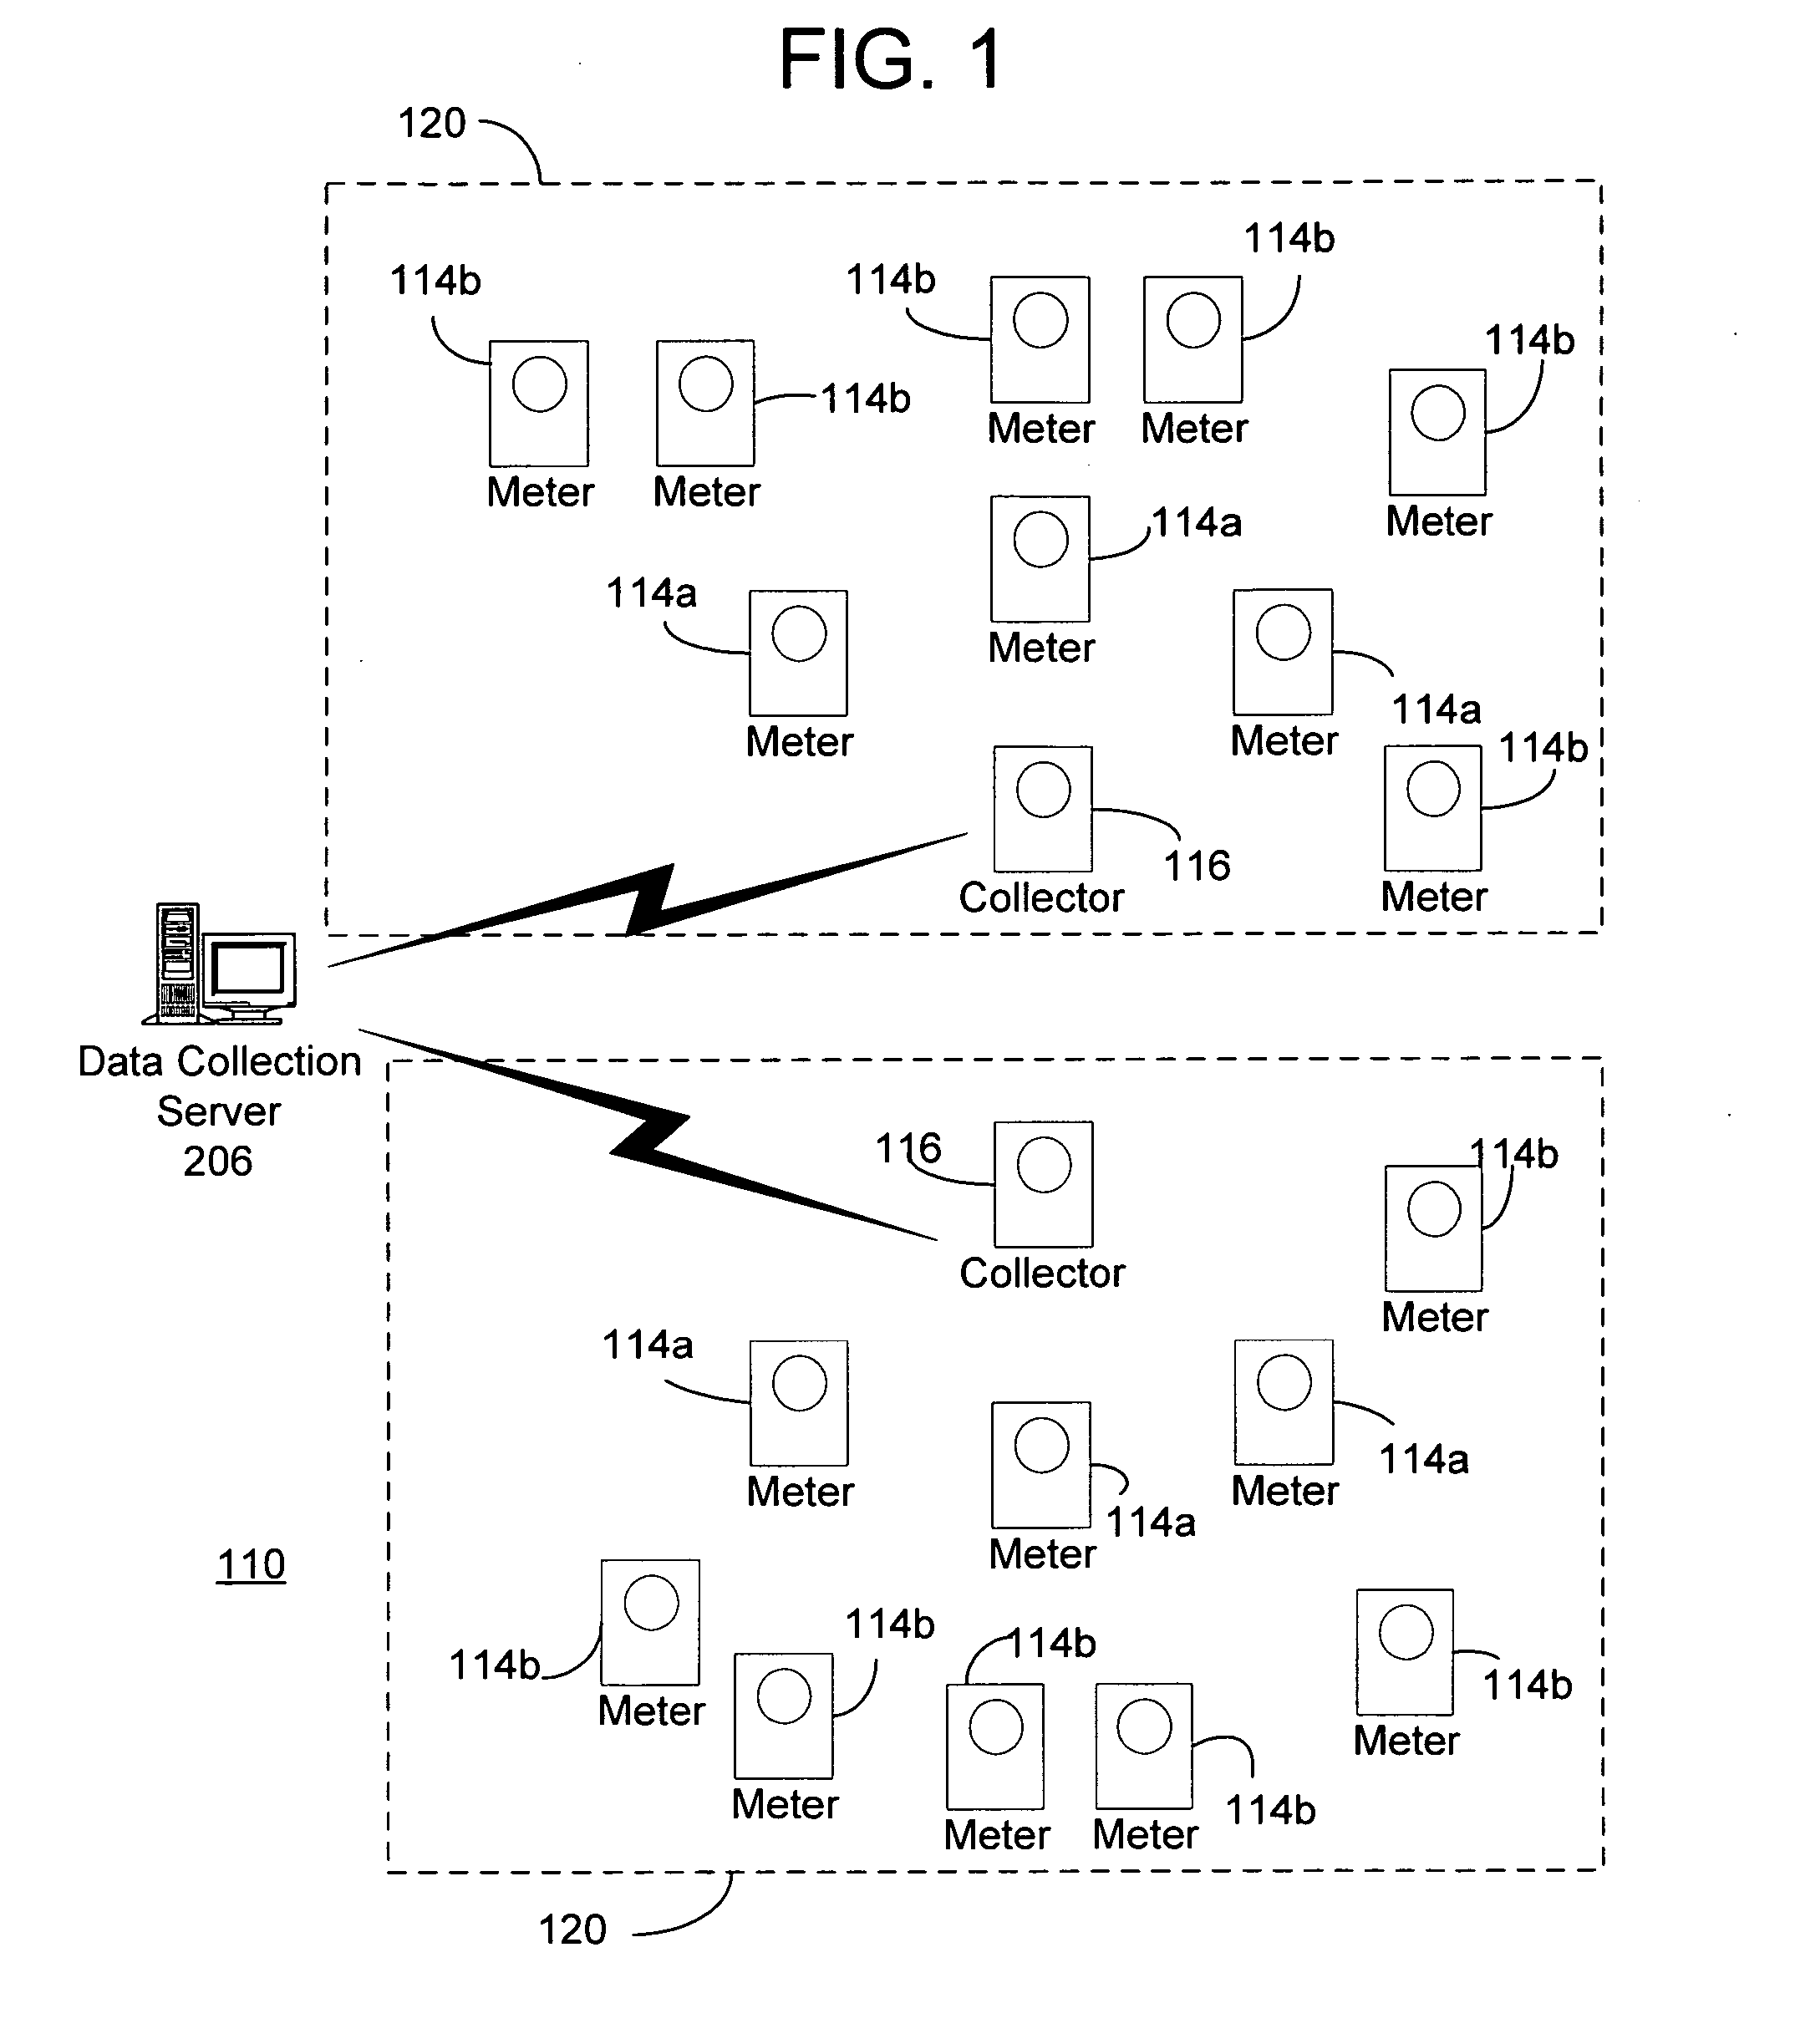 Load control unit in communication with a fixed network meter reading system